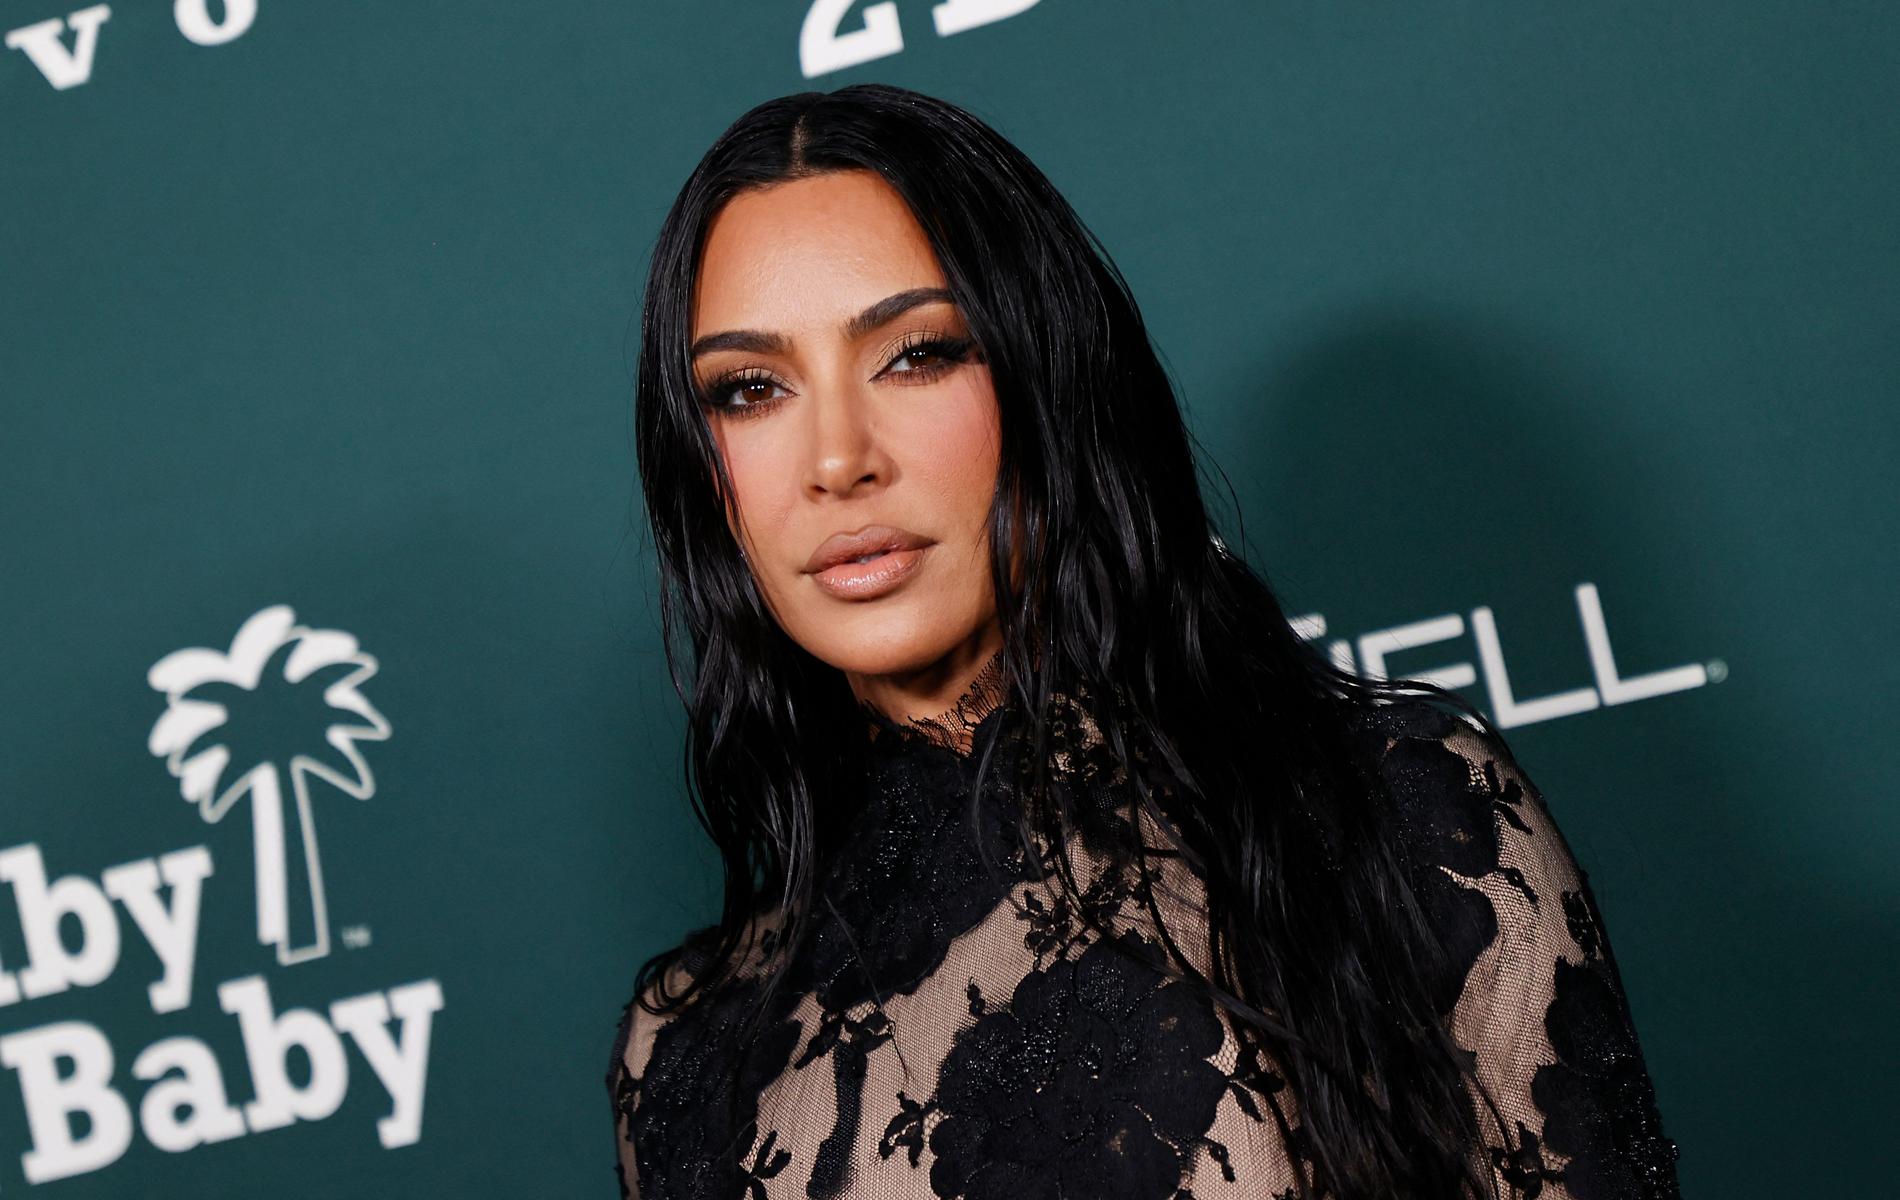 Kim Kardashian will play the role of a divorce lawyer